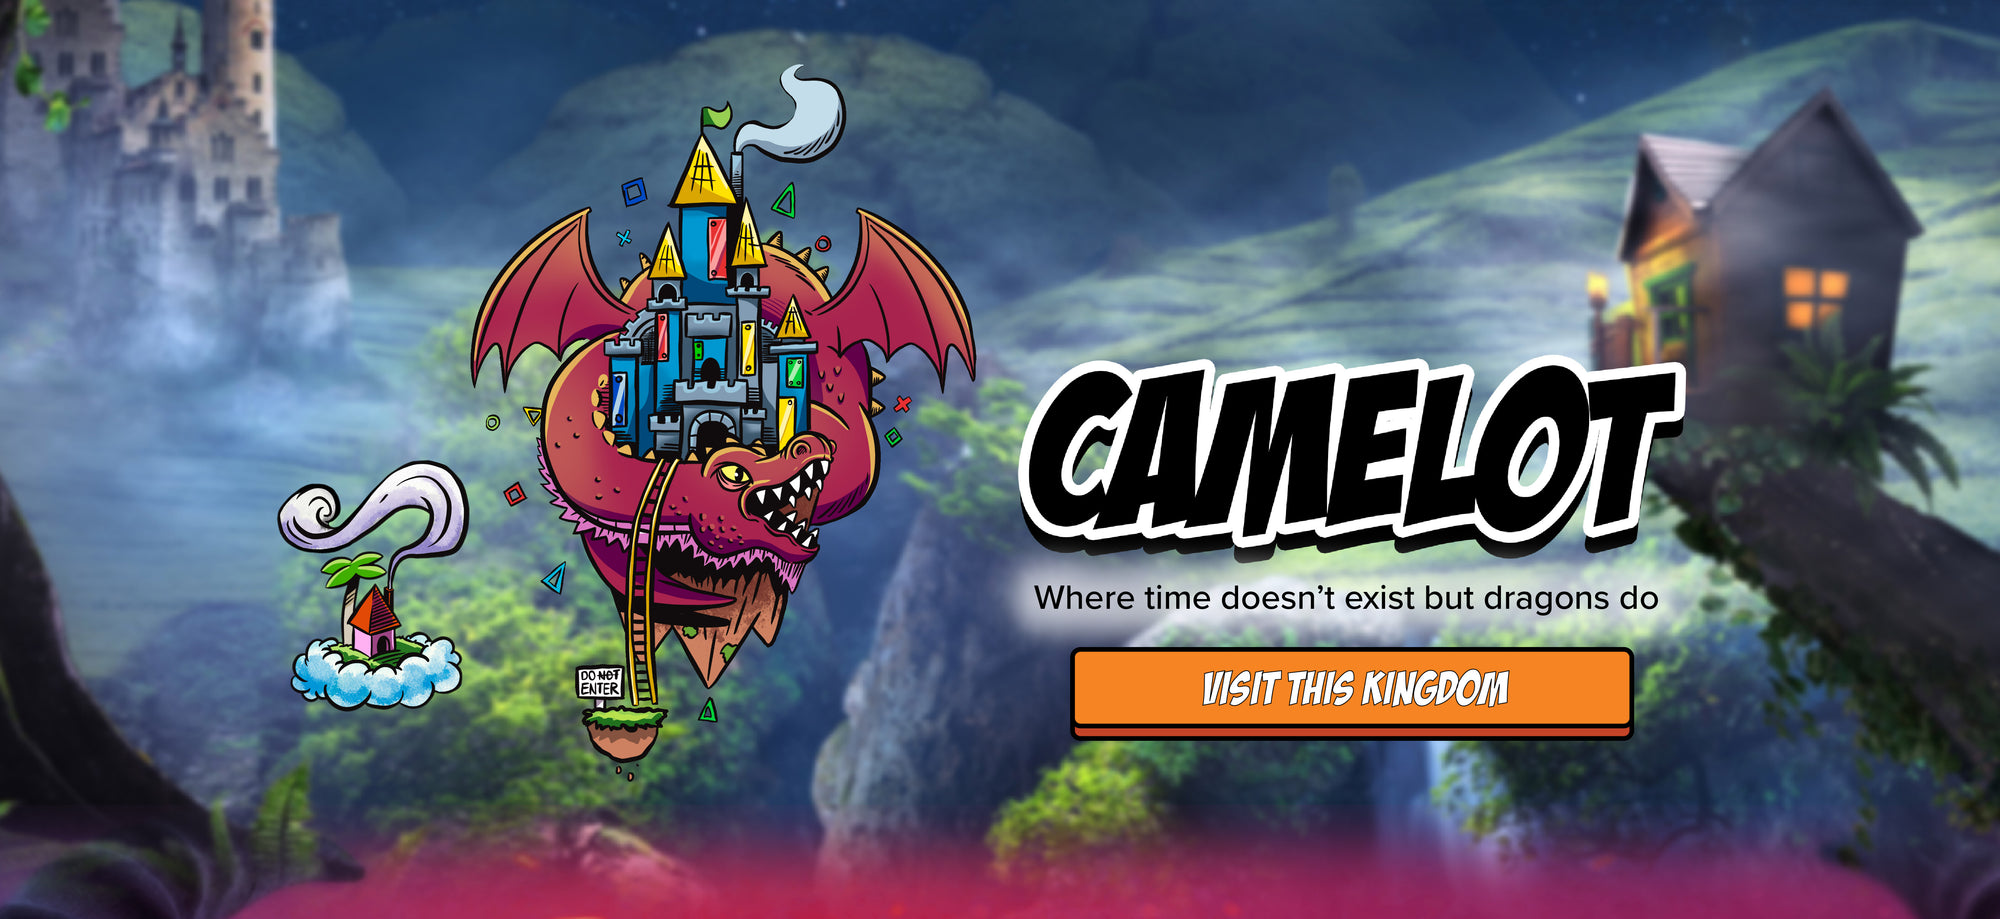 Illustrated image of Smashcraft's Camelot and Merlin's floating hut, on a realistic image of a magical hut and distant castle with text "Camelot, where time doesn't exist but dragons do", and a button with the words "visit this kingdom"